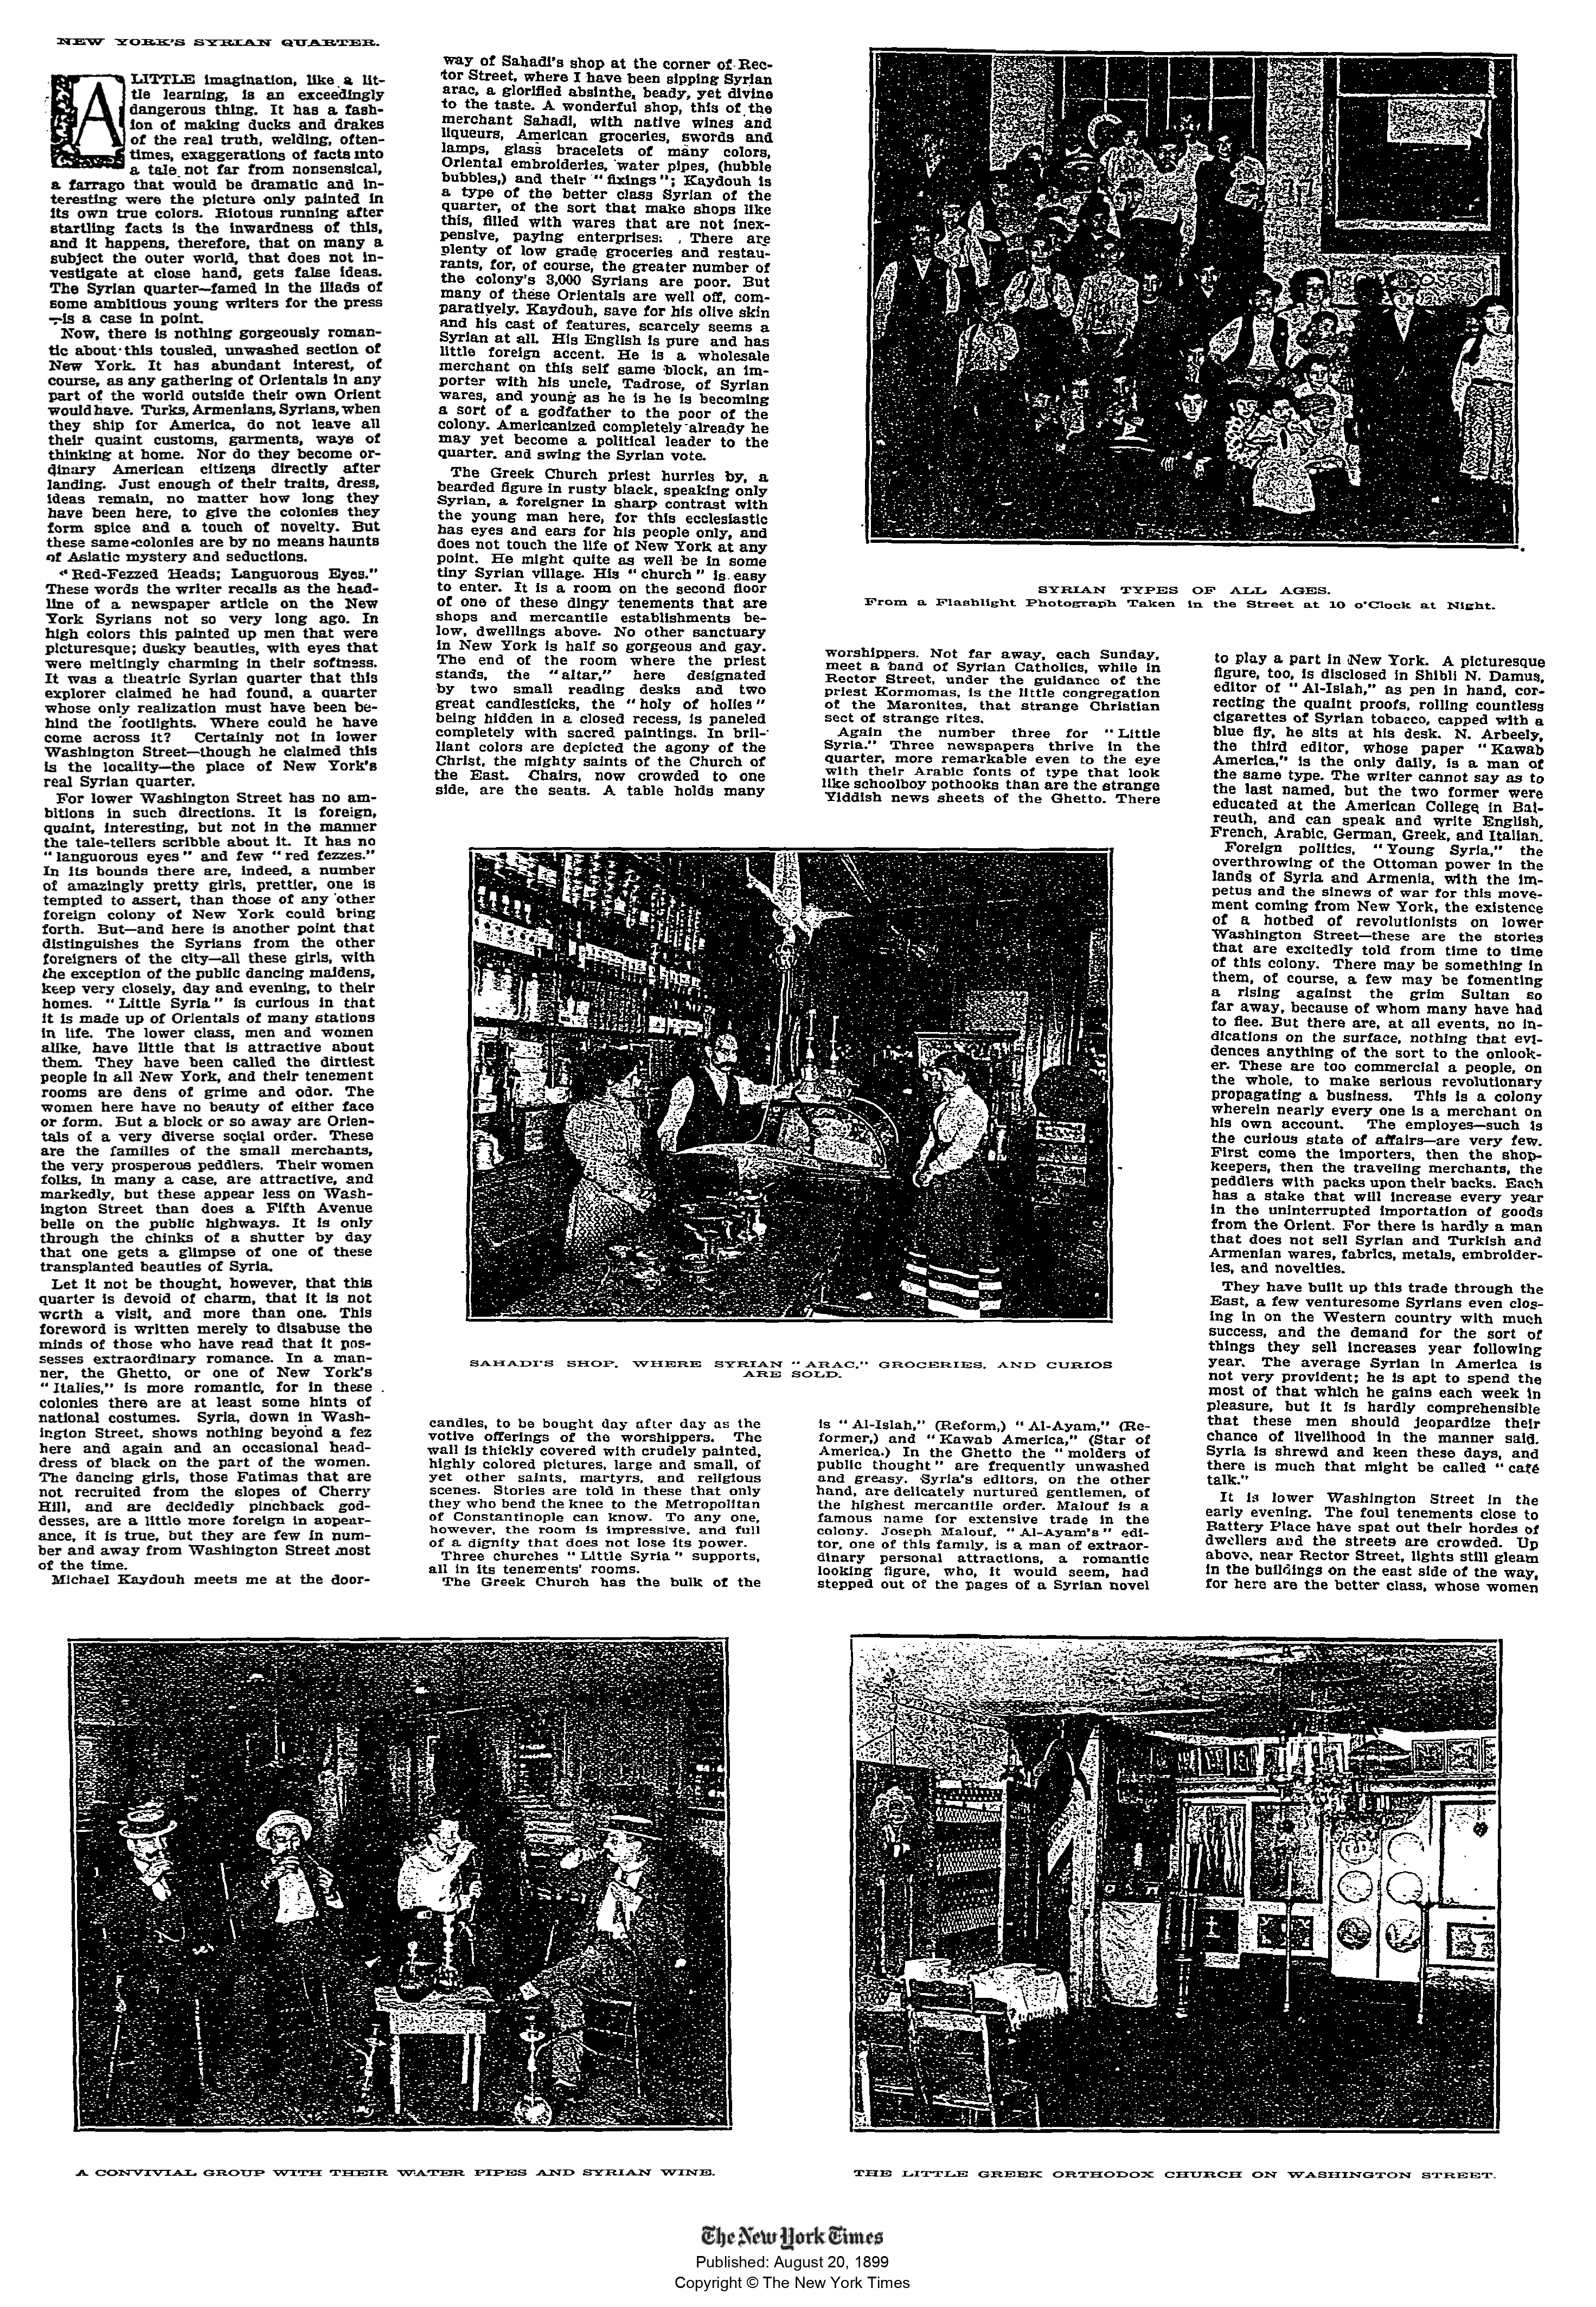 Cromwell Childe, "New York's Syrian Quarter", The New York Times, August 20, 1899.